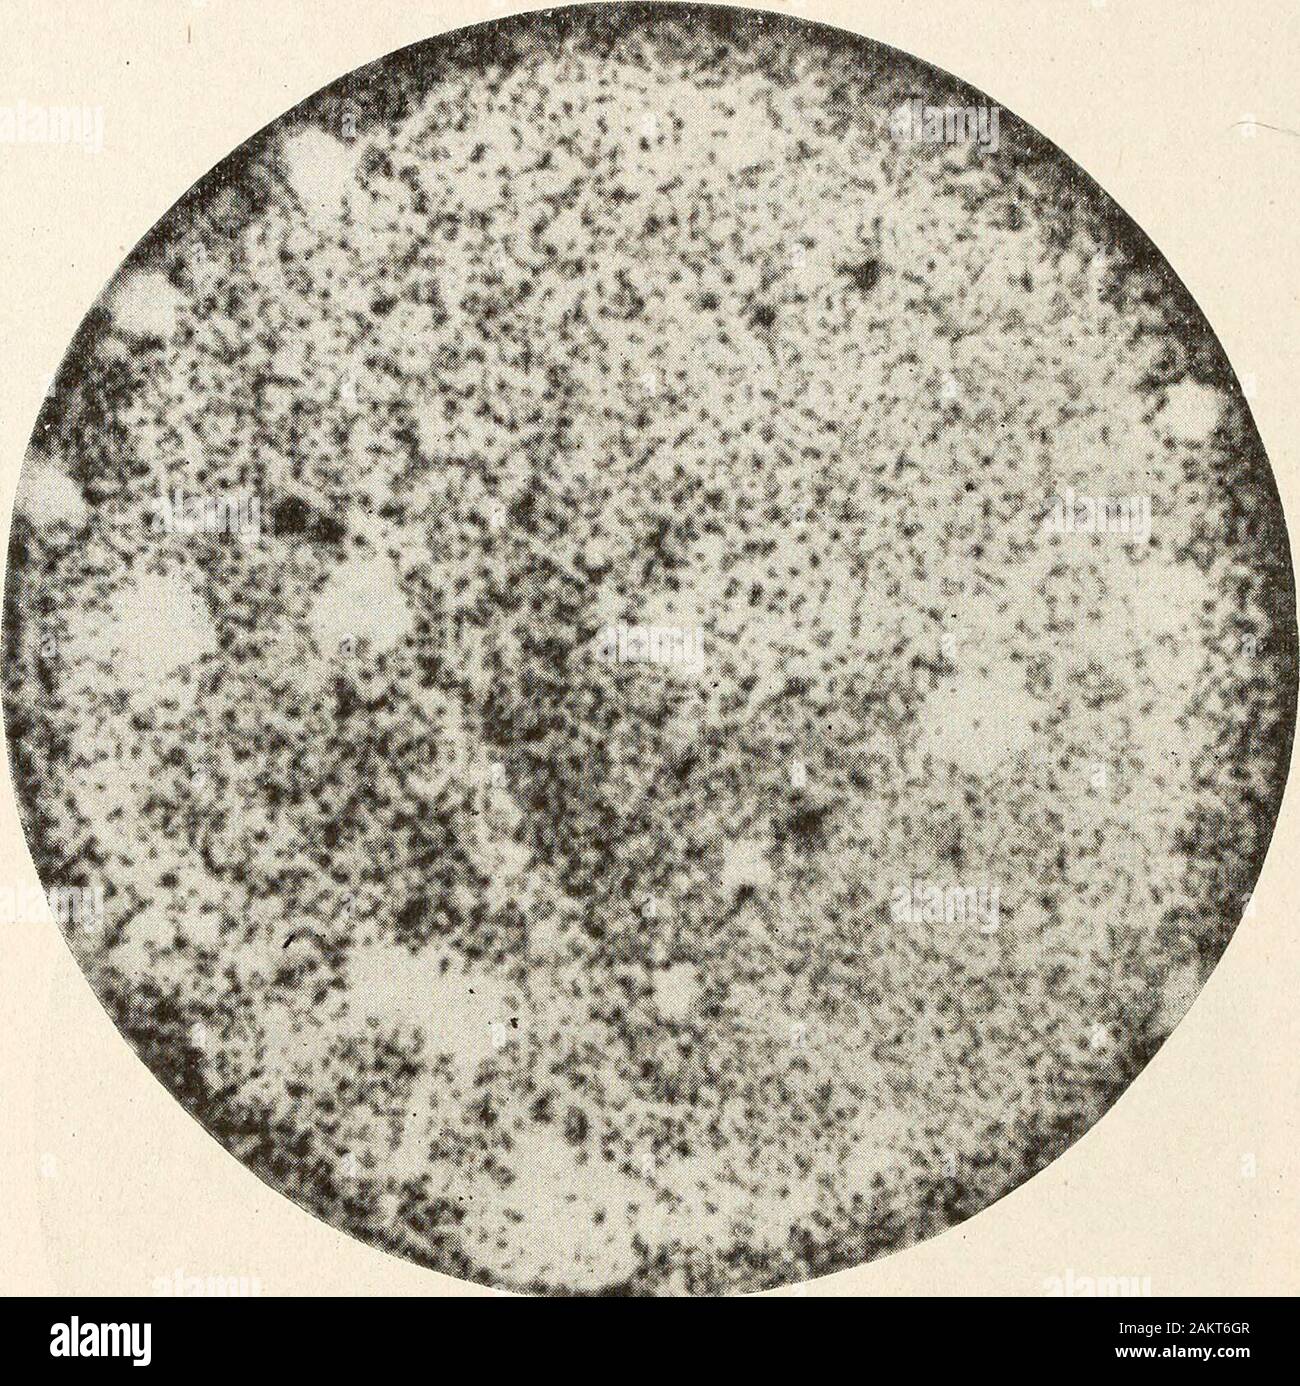 Annual report of the North Carolina Agricultural Experiment Station . Fig. 4.— Volutella fructi S. and H., showing colonies on thinly sown plate culture. Thinly sown, the colonies were large, of indeterminate growth, showing darkcenters with pale borders I Fig. 4) ; thickly sown, growth was inhibited andtheir characters lost. (Fig. 5.) Spermoedia paspali Fries, from paspalum. Spores of this fungus were sown January 19, 1907, in plates giving colonydensities of 90. .14. 30. 14 and 1 per scpiare mm. At all of these densities germination was practically 100 per cent andgrowth proceeded equally in Stock Photo